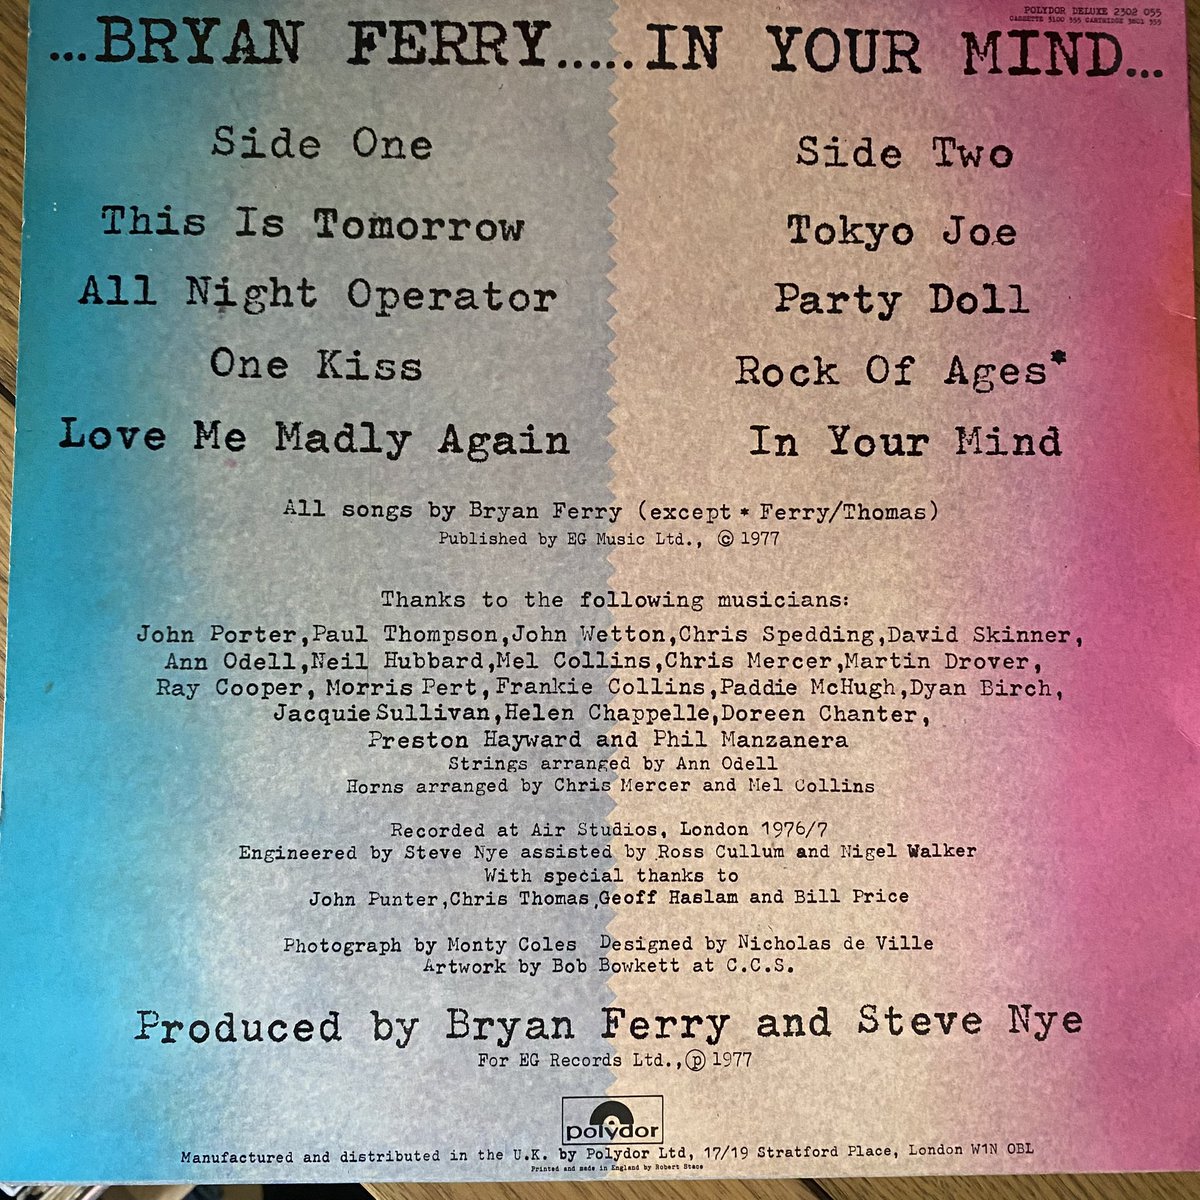 #NowPlaying
Bryan Ferry “In Your Mind”.
🇬🇧#5 album from 1977.
Singles:
This Is Tomorrow 🇬🇧#9
Tokyo Joe 🇬🇧#15
#BryanFerry #70s #70sVinyl